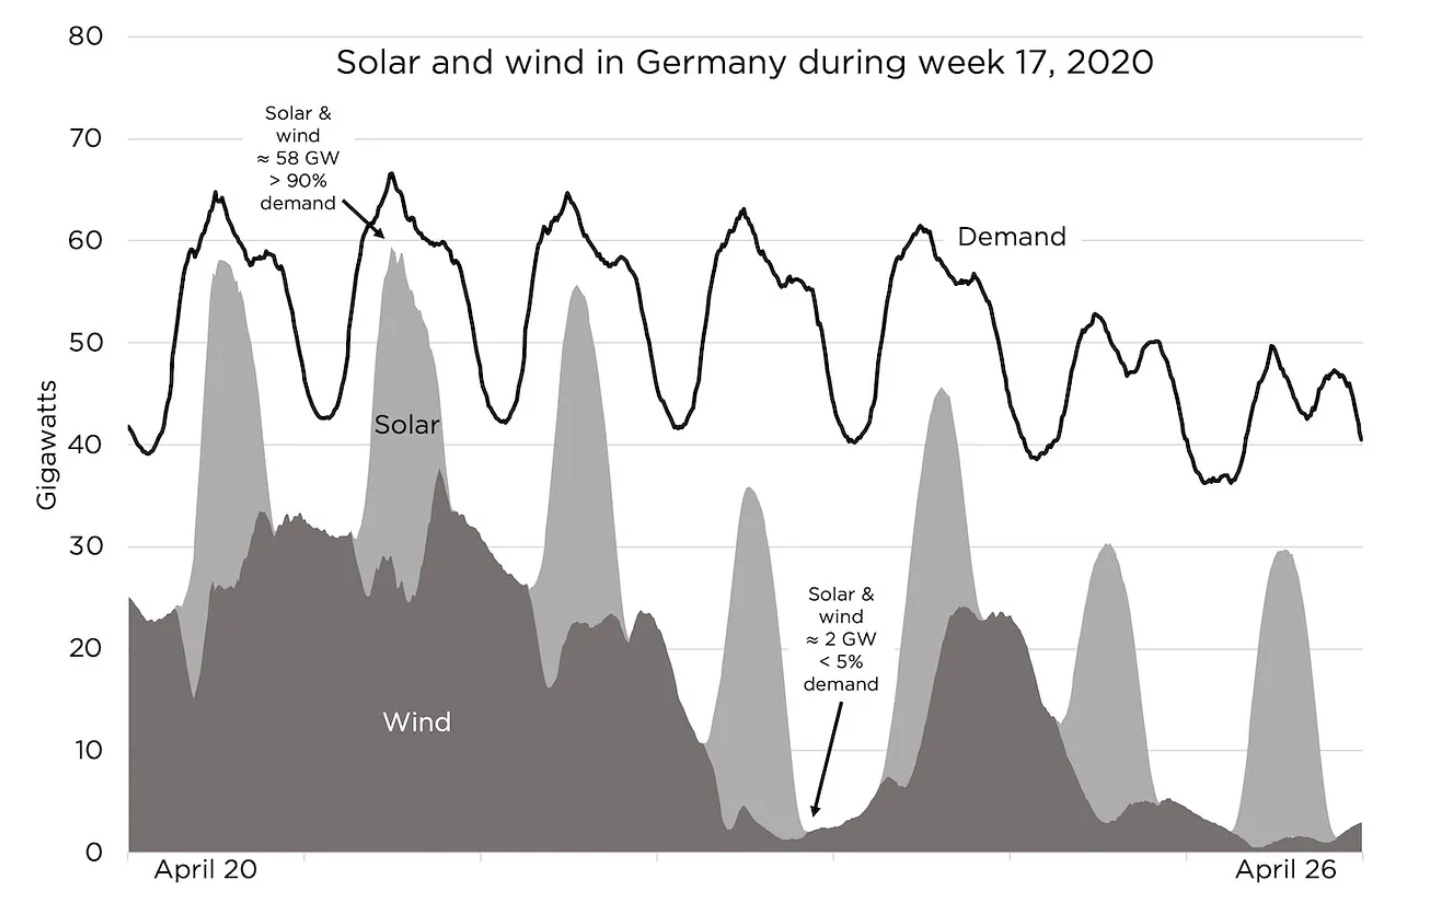 IMAGE 18 - Solar and wind in Germany during week 17, 2020